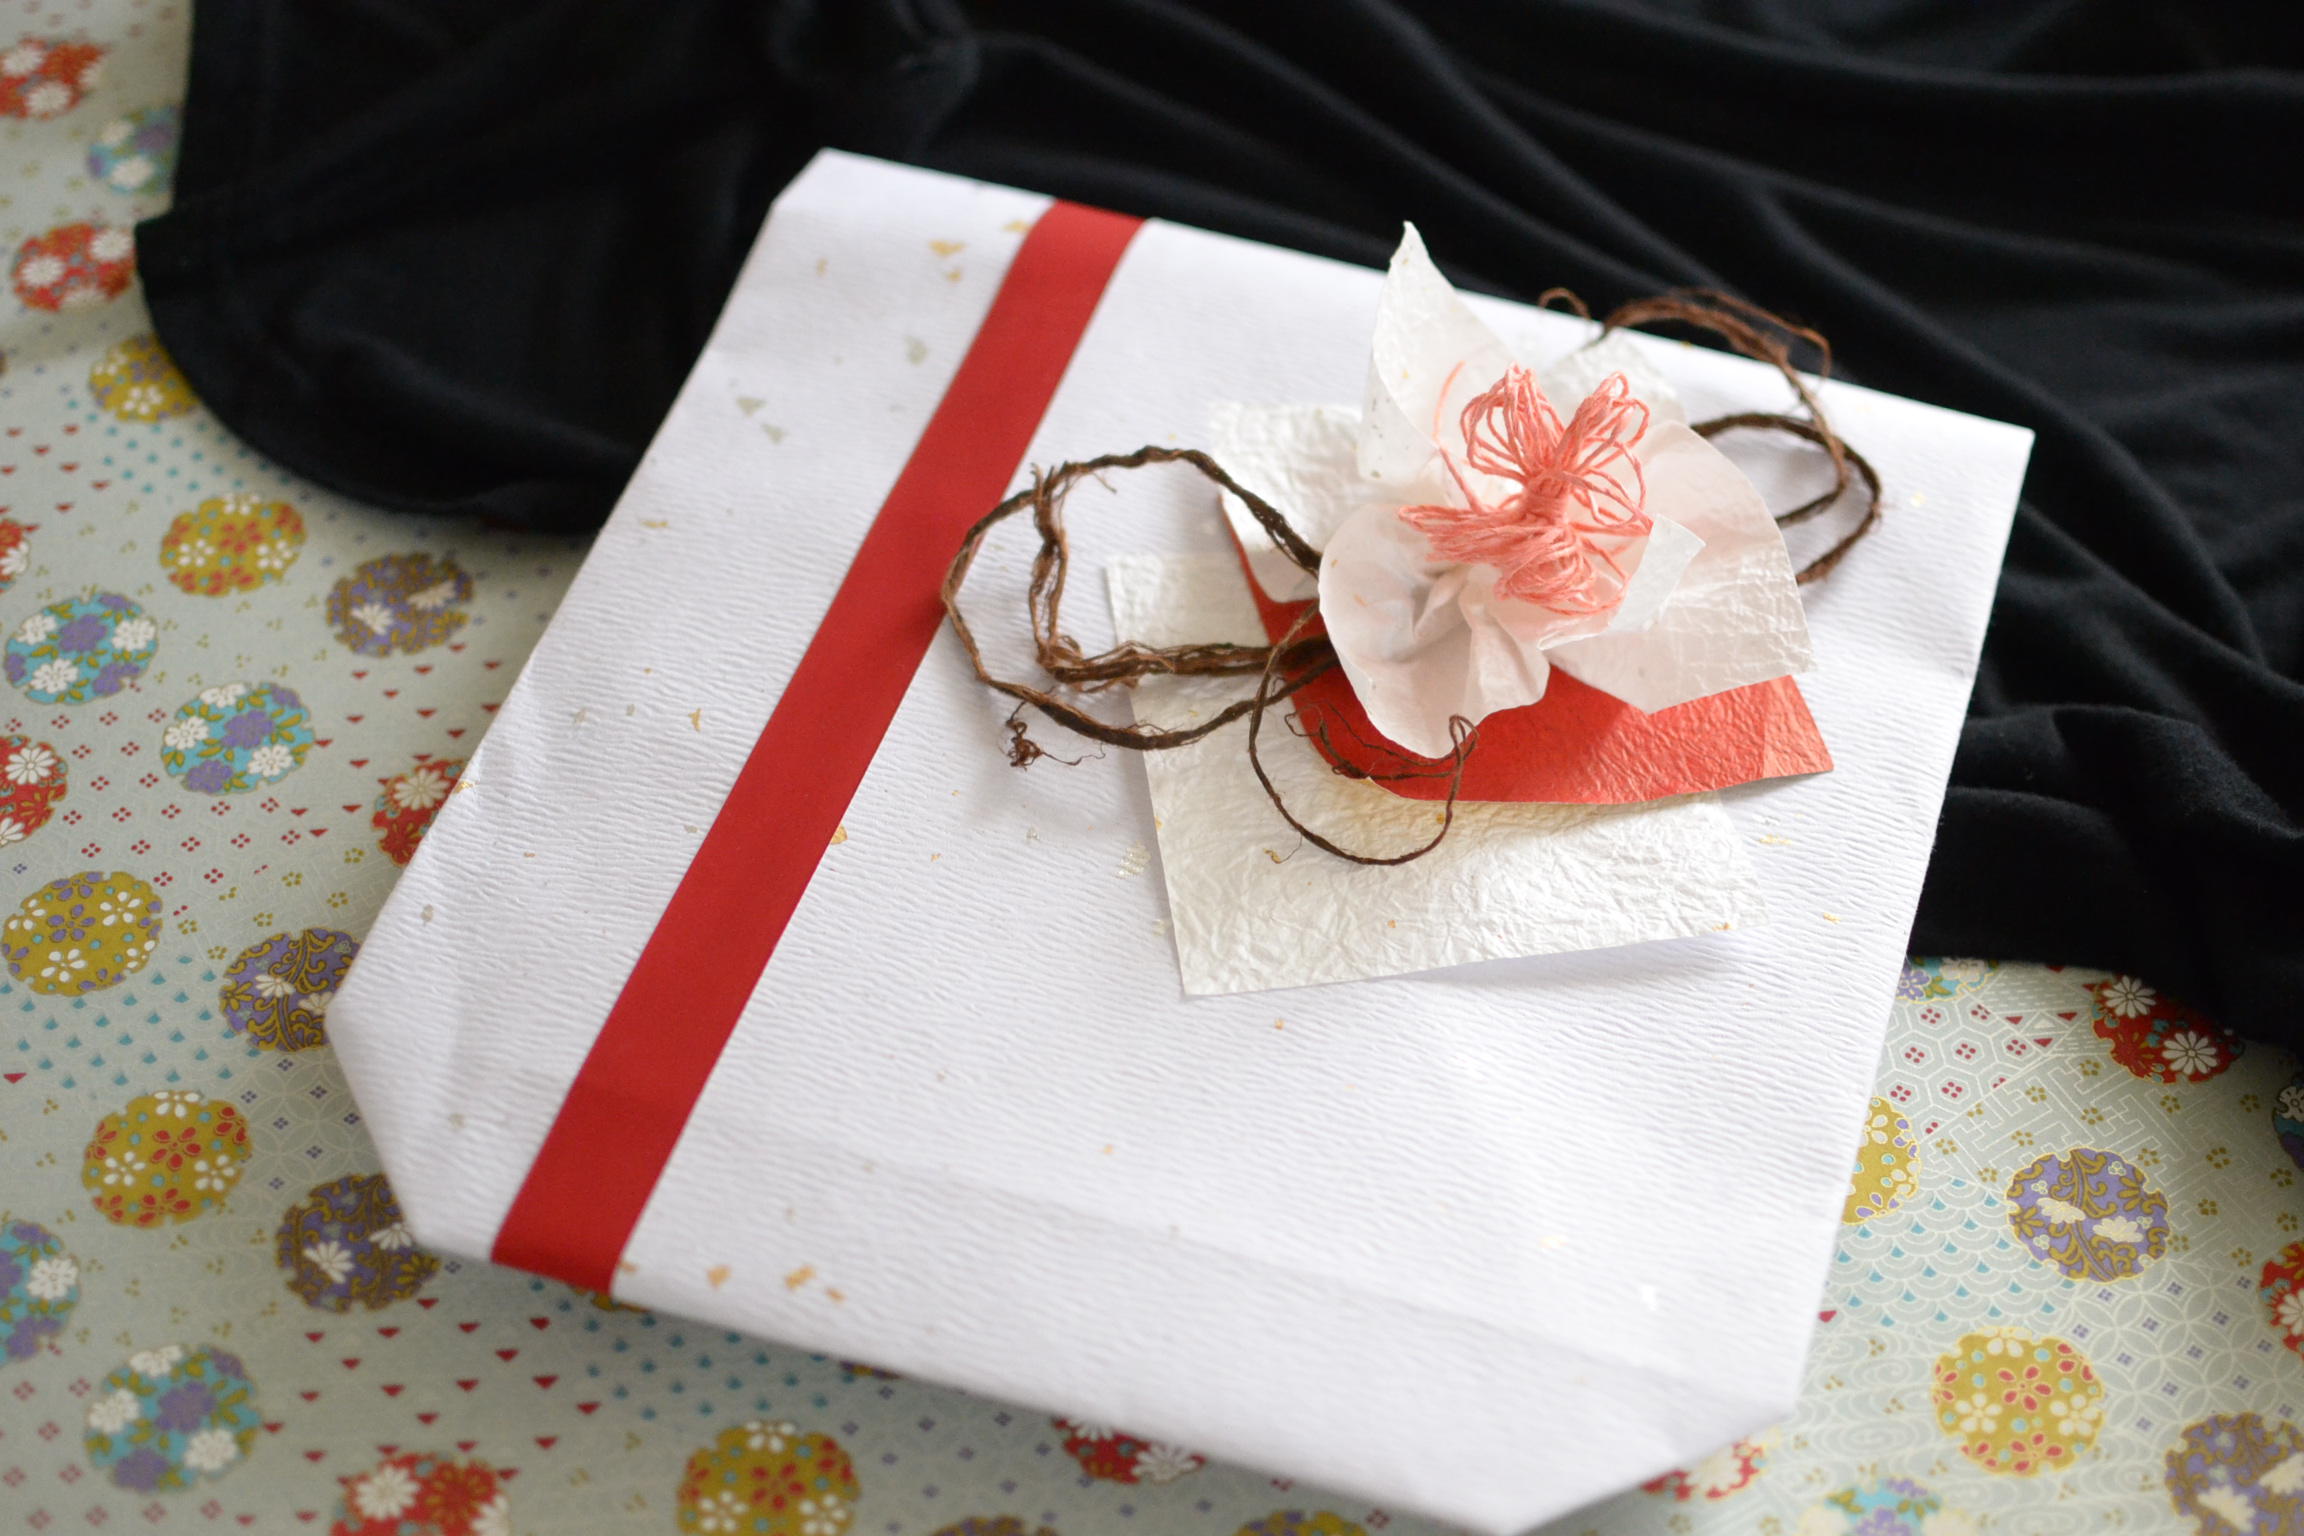 online_washi_wrapping paper_bag.jpg